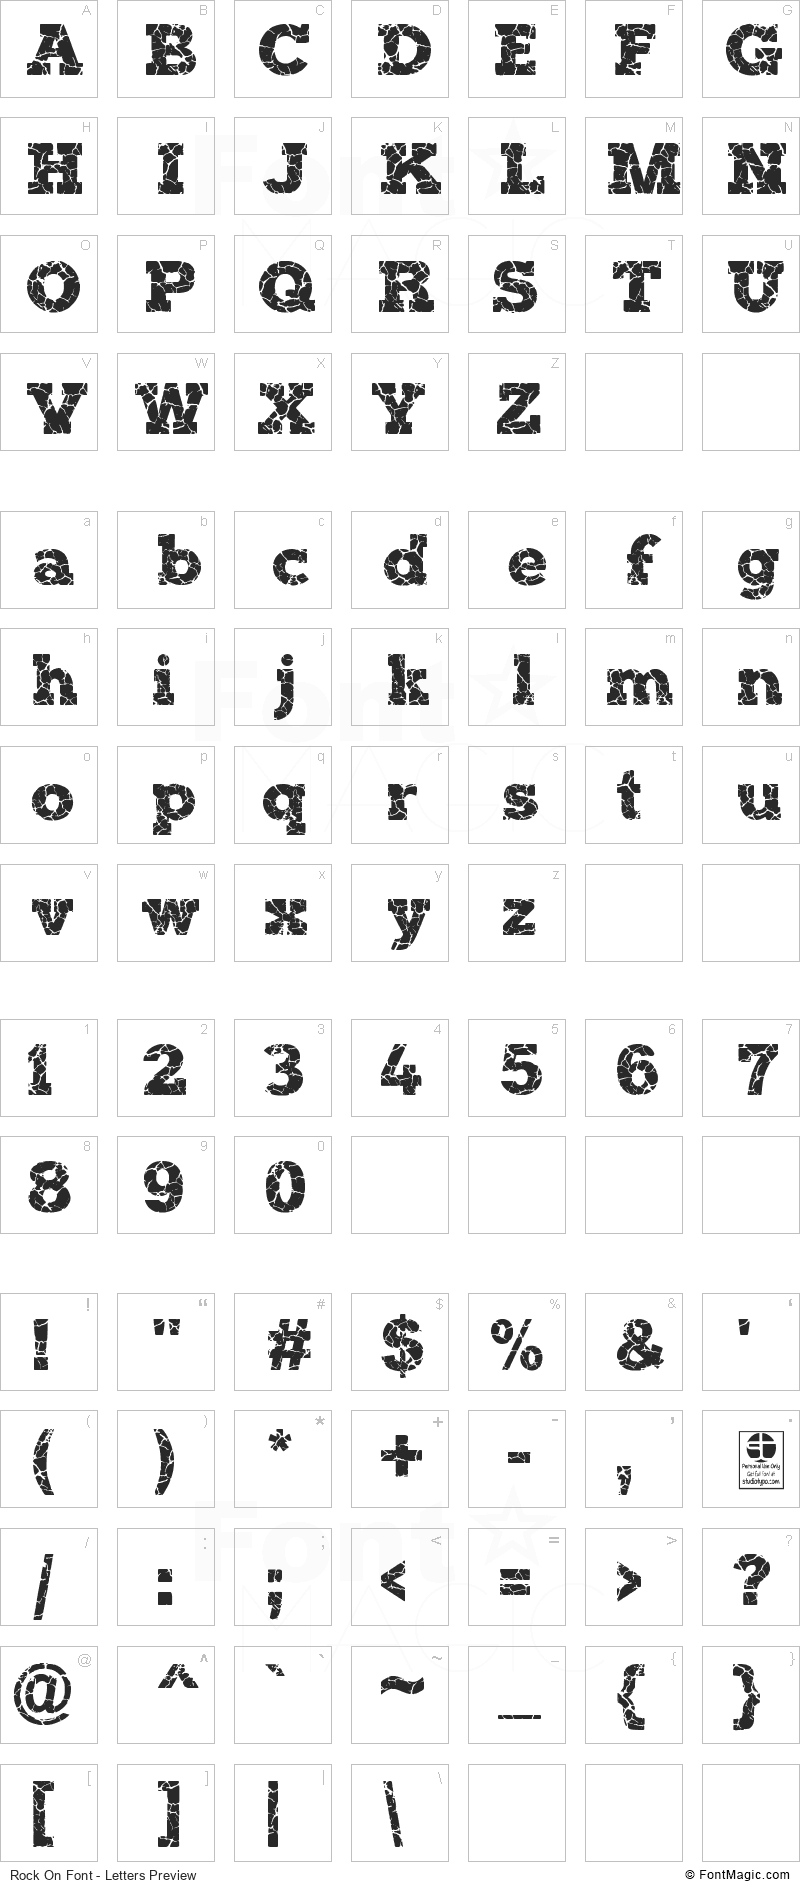 Rock On Font - All Latters Preview Chart